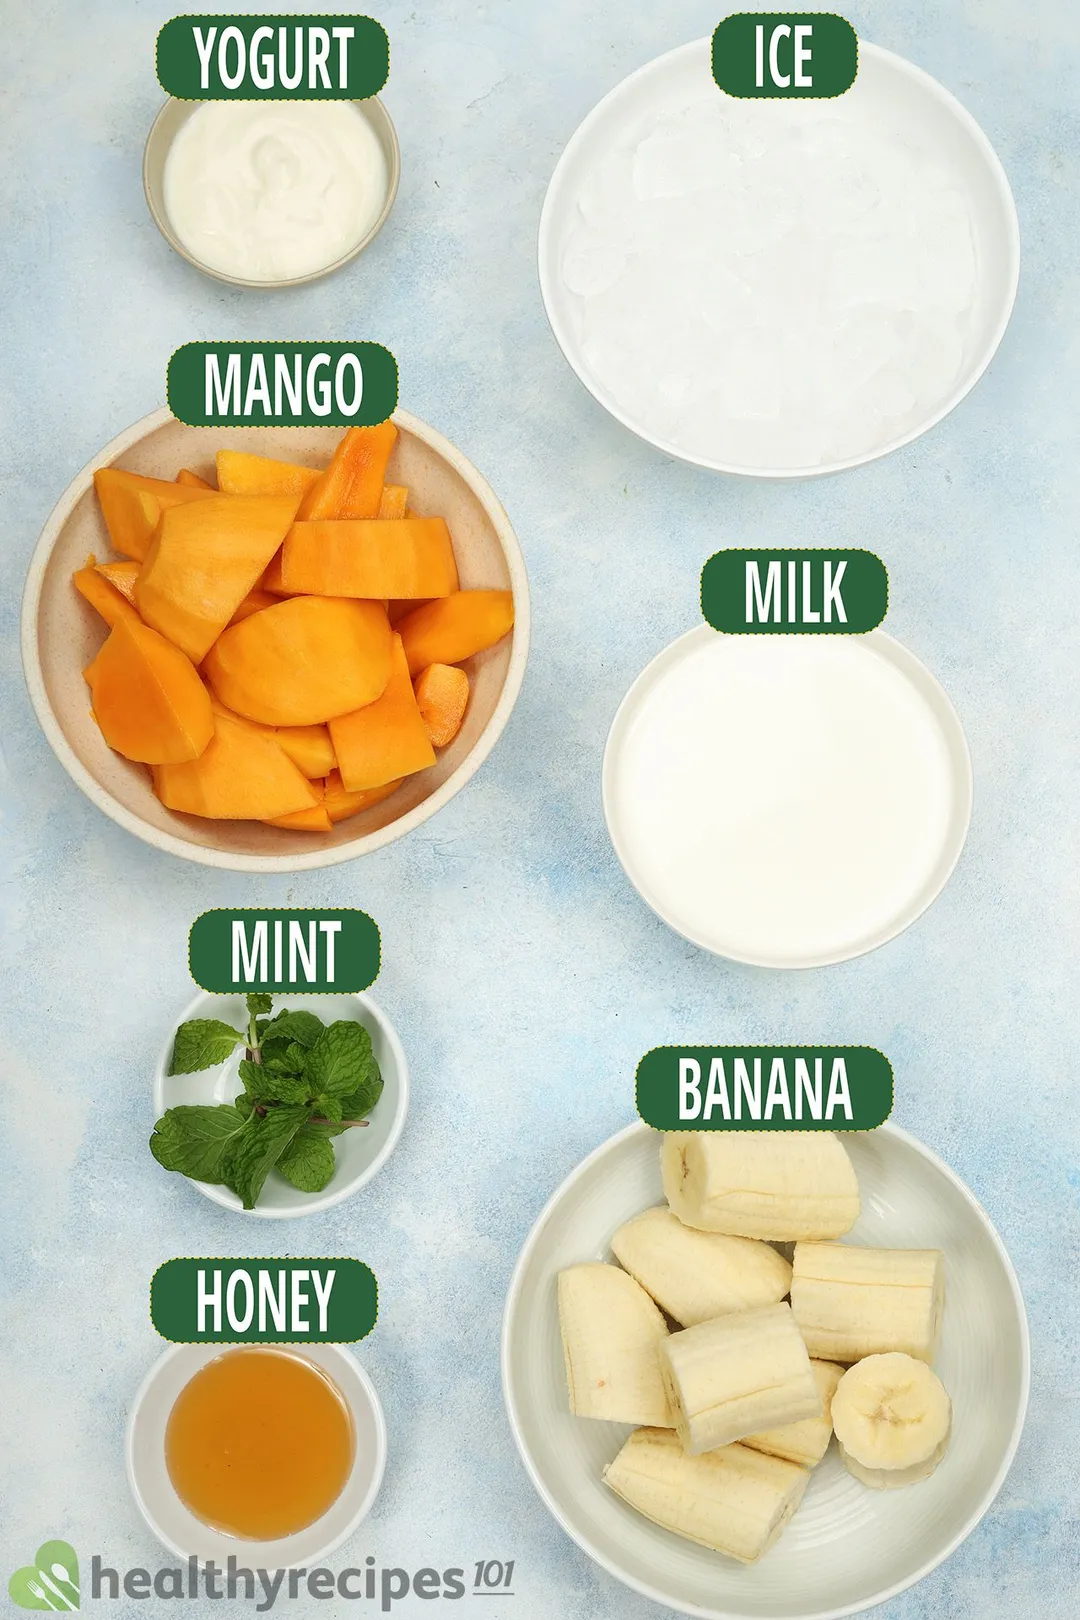 Ingredients for Mango Banana Smoothie, including bowls of mango slices, peeled bananas, ice, and other smoothie essentials.